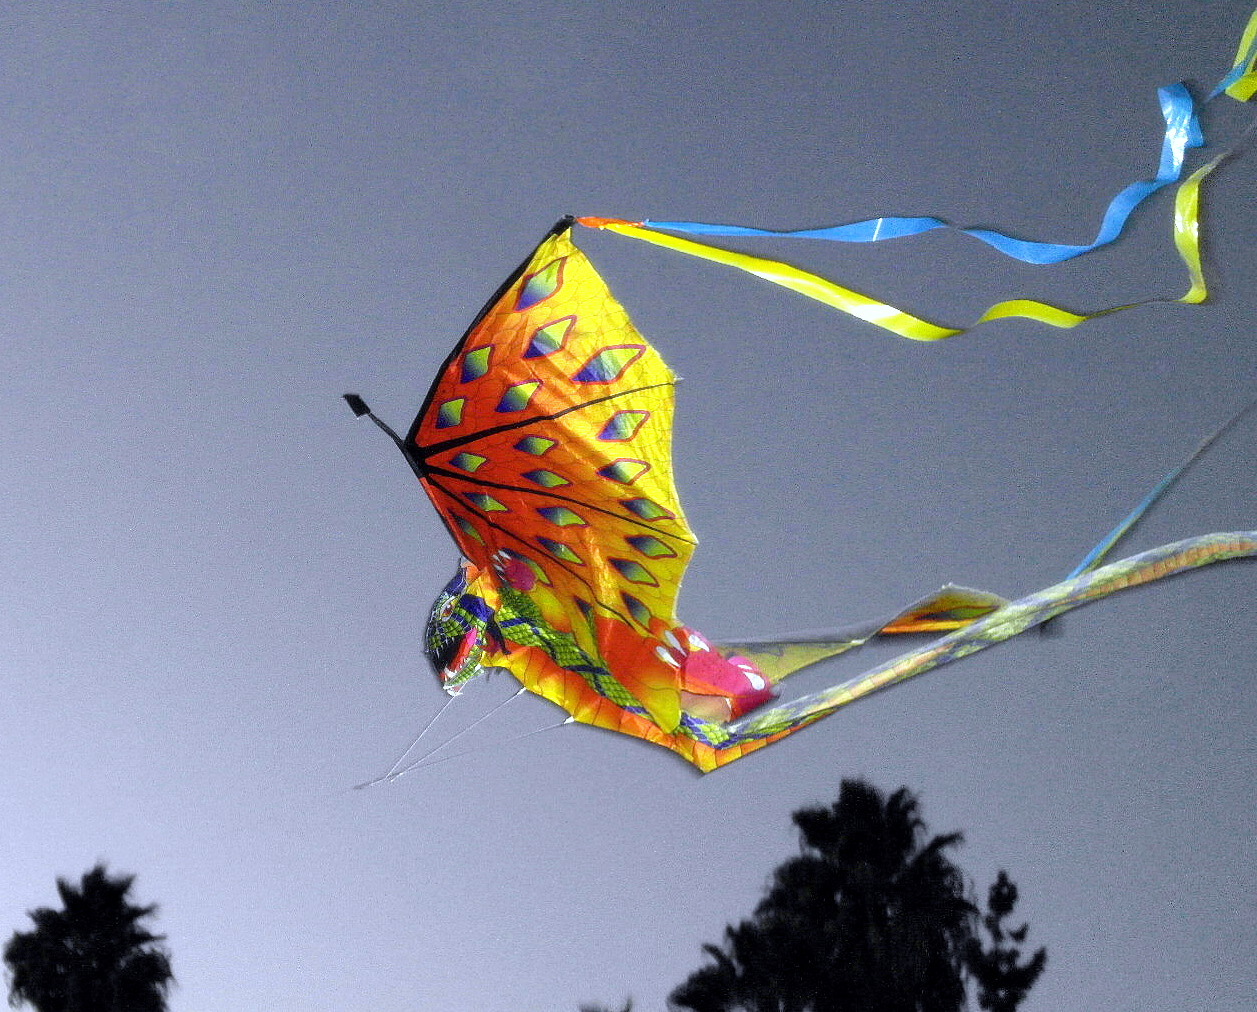 a kite is being flown by a tree